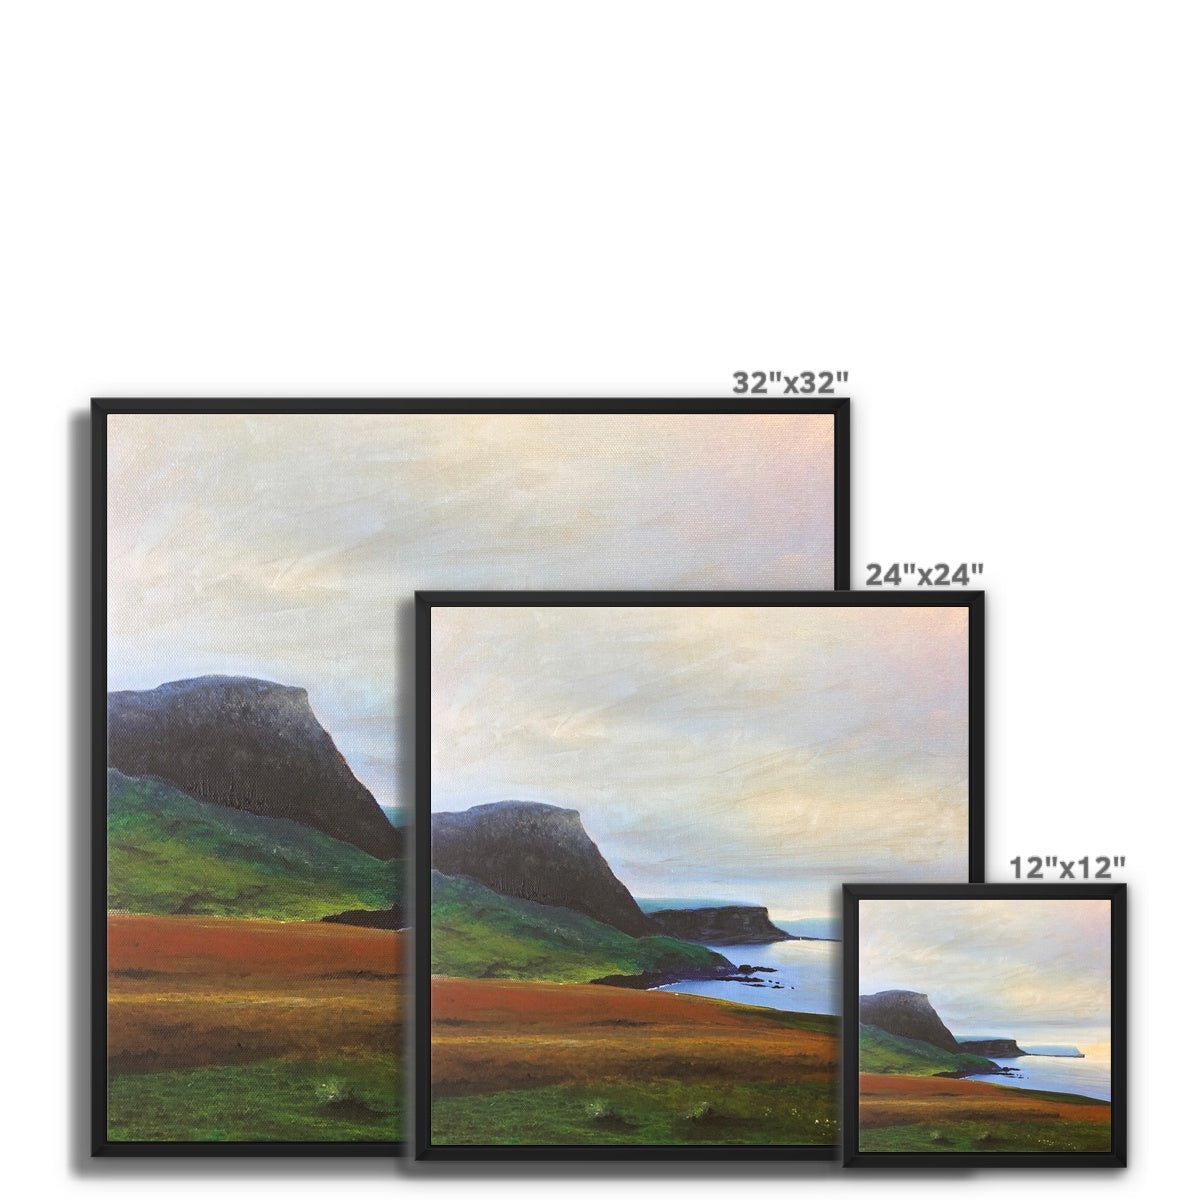 Neist Point Cliffs Skye Painting | Framed Canvas From Scotland-Floating Framed Canvas Prints-Skye Art Gallery-Paintings, Prints, Homeware, Art Gifts From Scotland By Scottish Artist Kevin Hunter